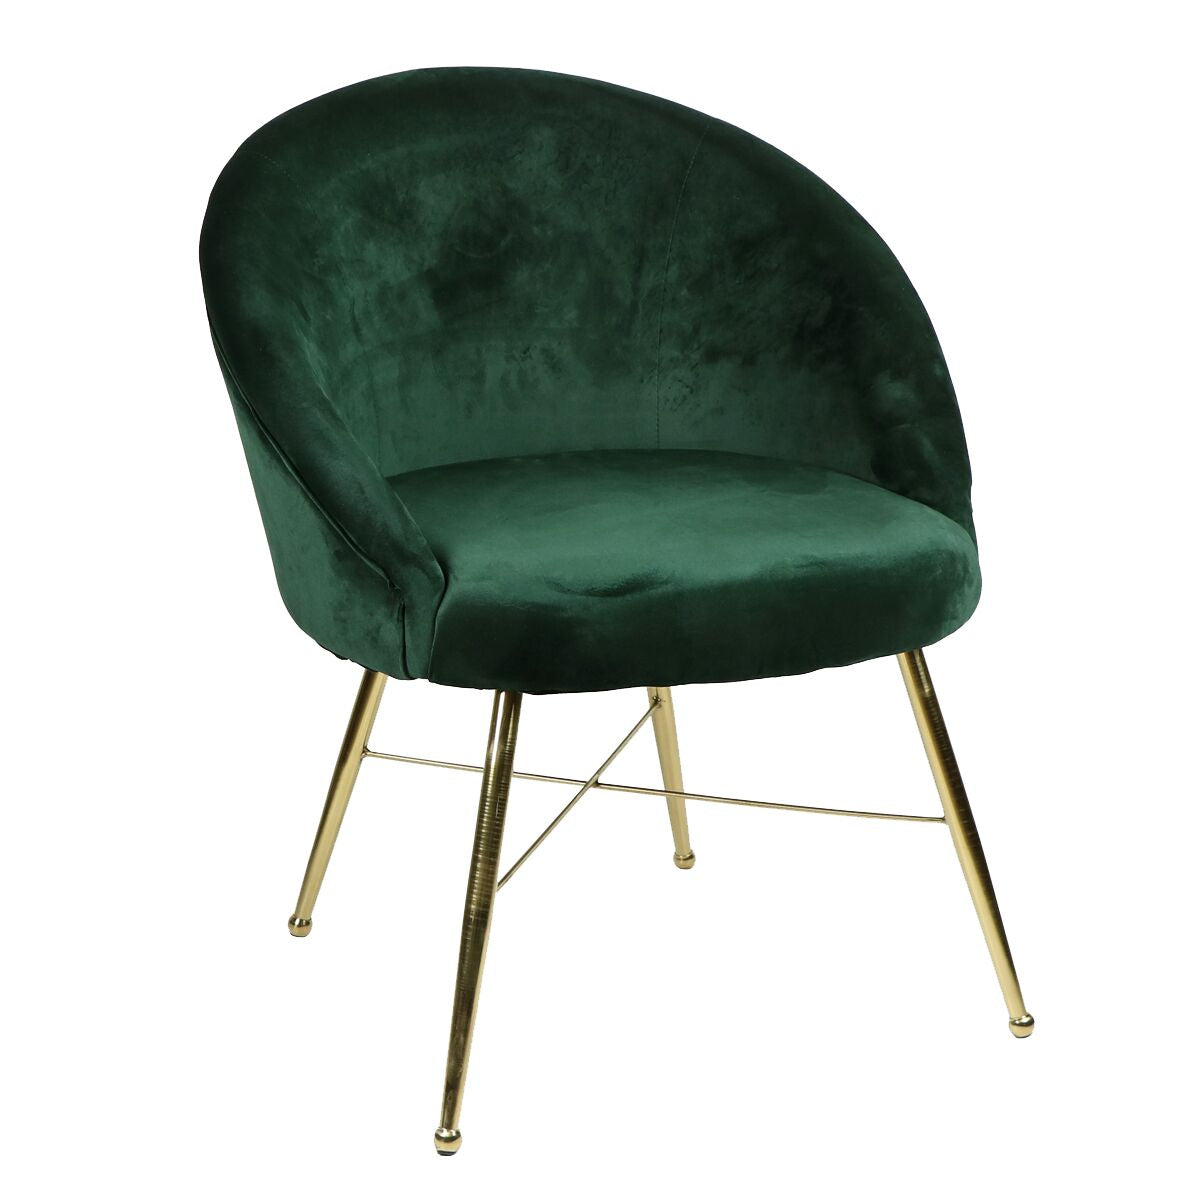 Chantilly Side Chair